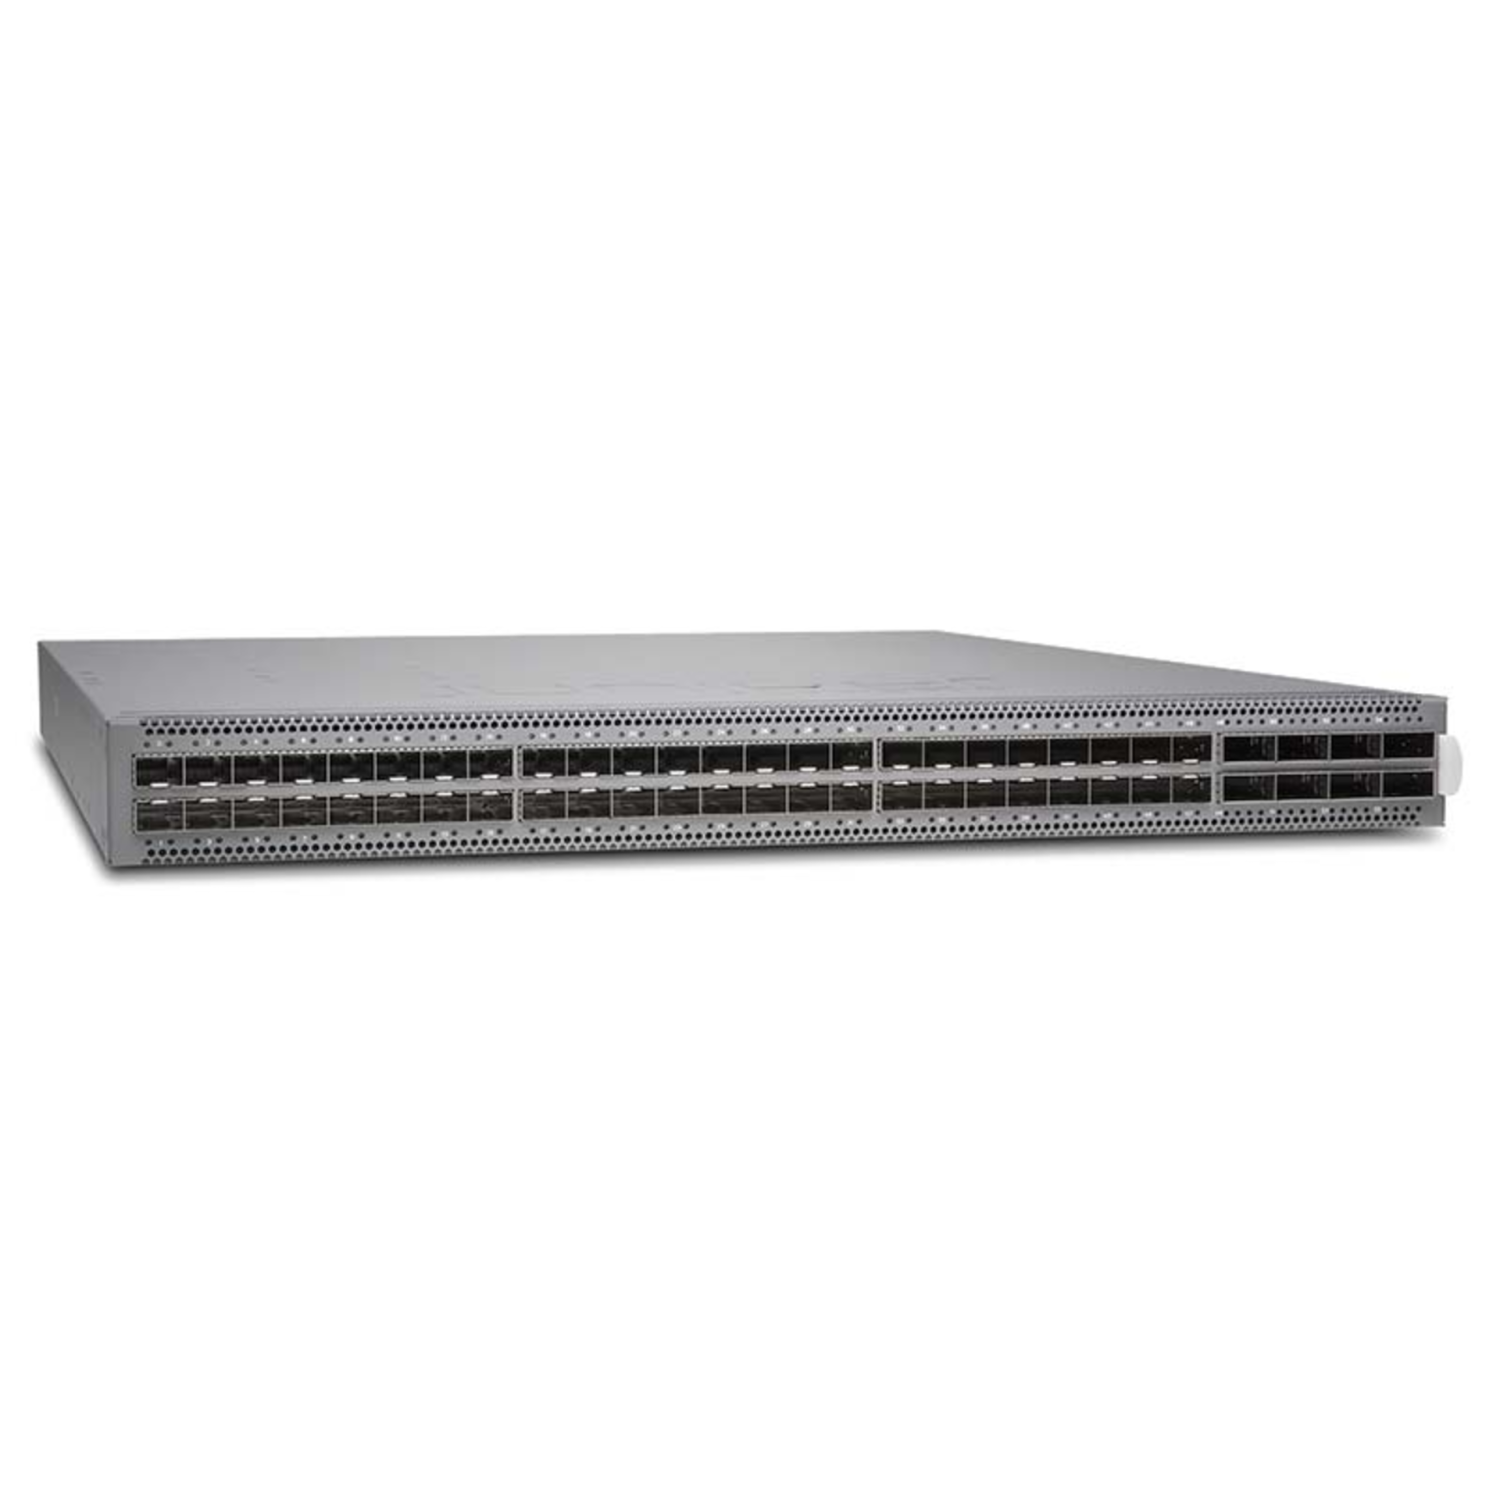 Коммутатор Juniper QFX5120-48Y-AFI2, airflow in, redundant AC PSUs and FANs Ships with base S/W features.